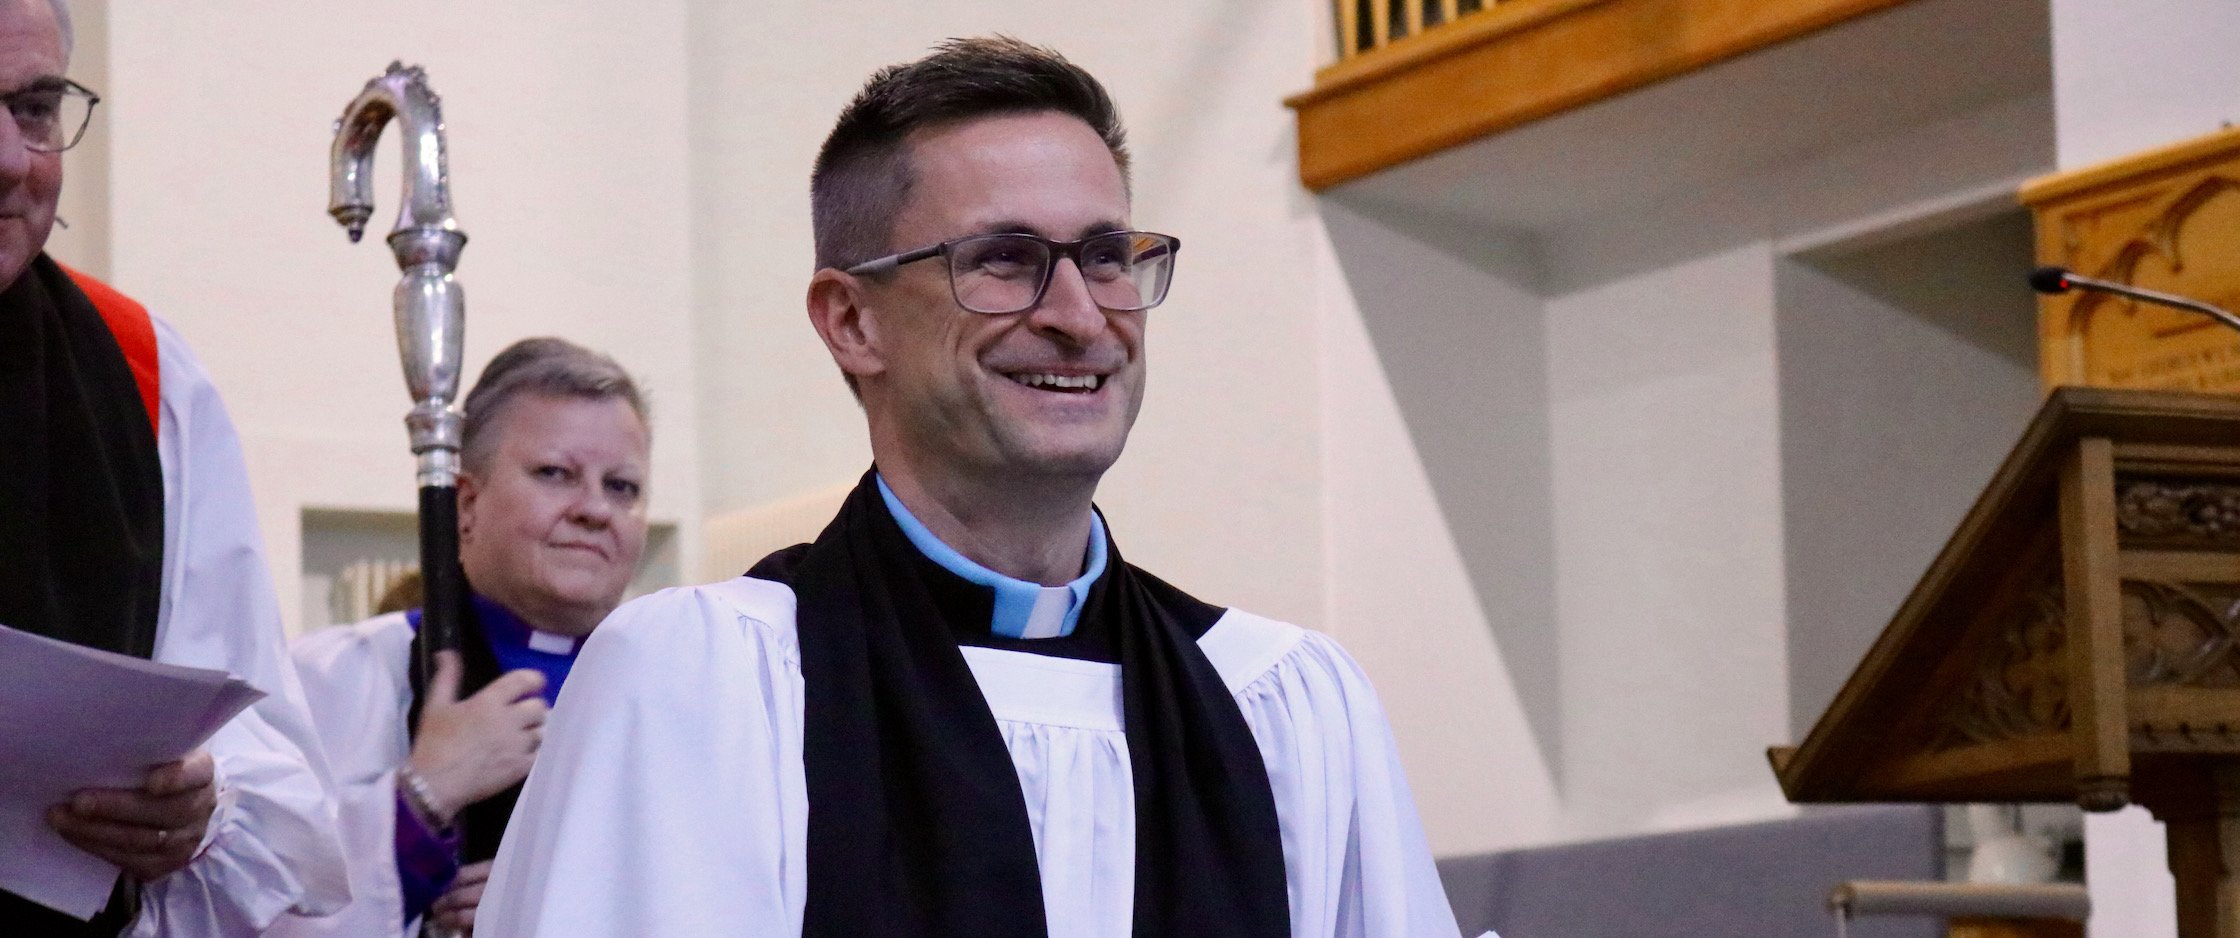 Dave Thomas is ordained deacon